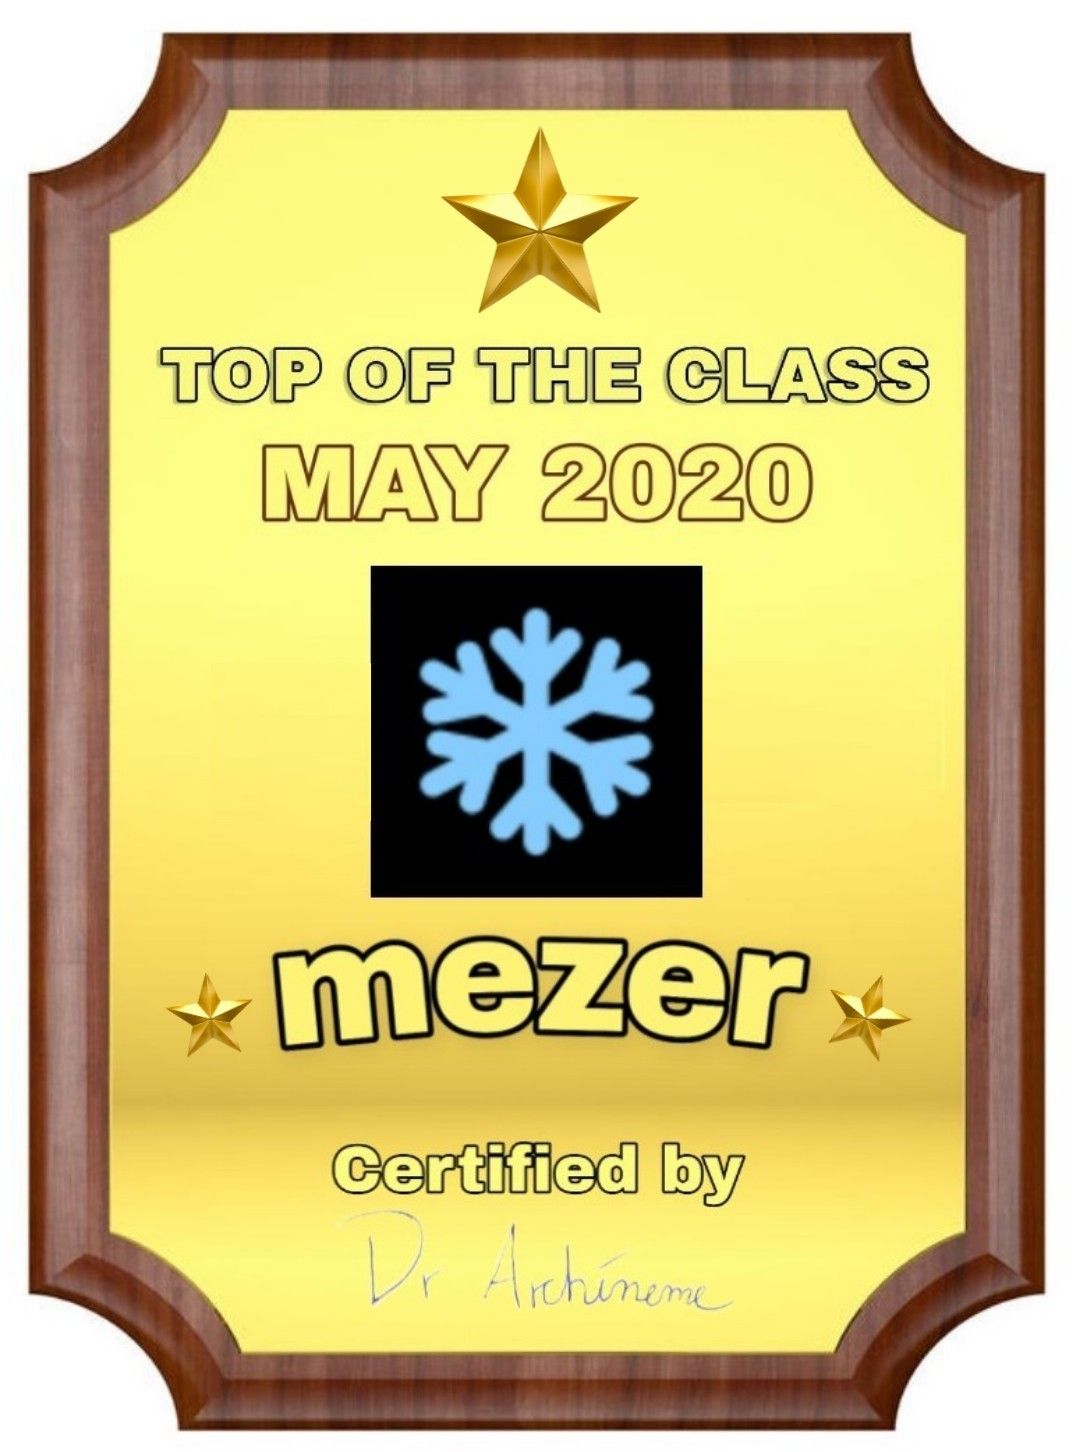 And here they are boys and girls, the Top Student of May: mezer!